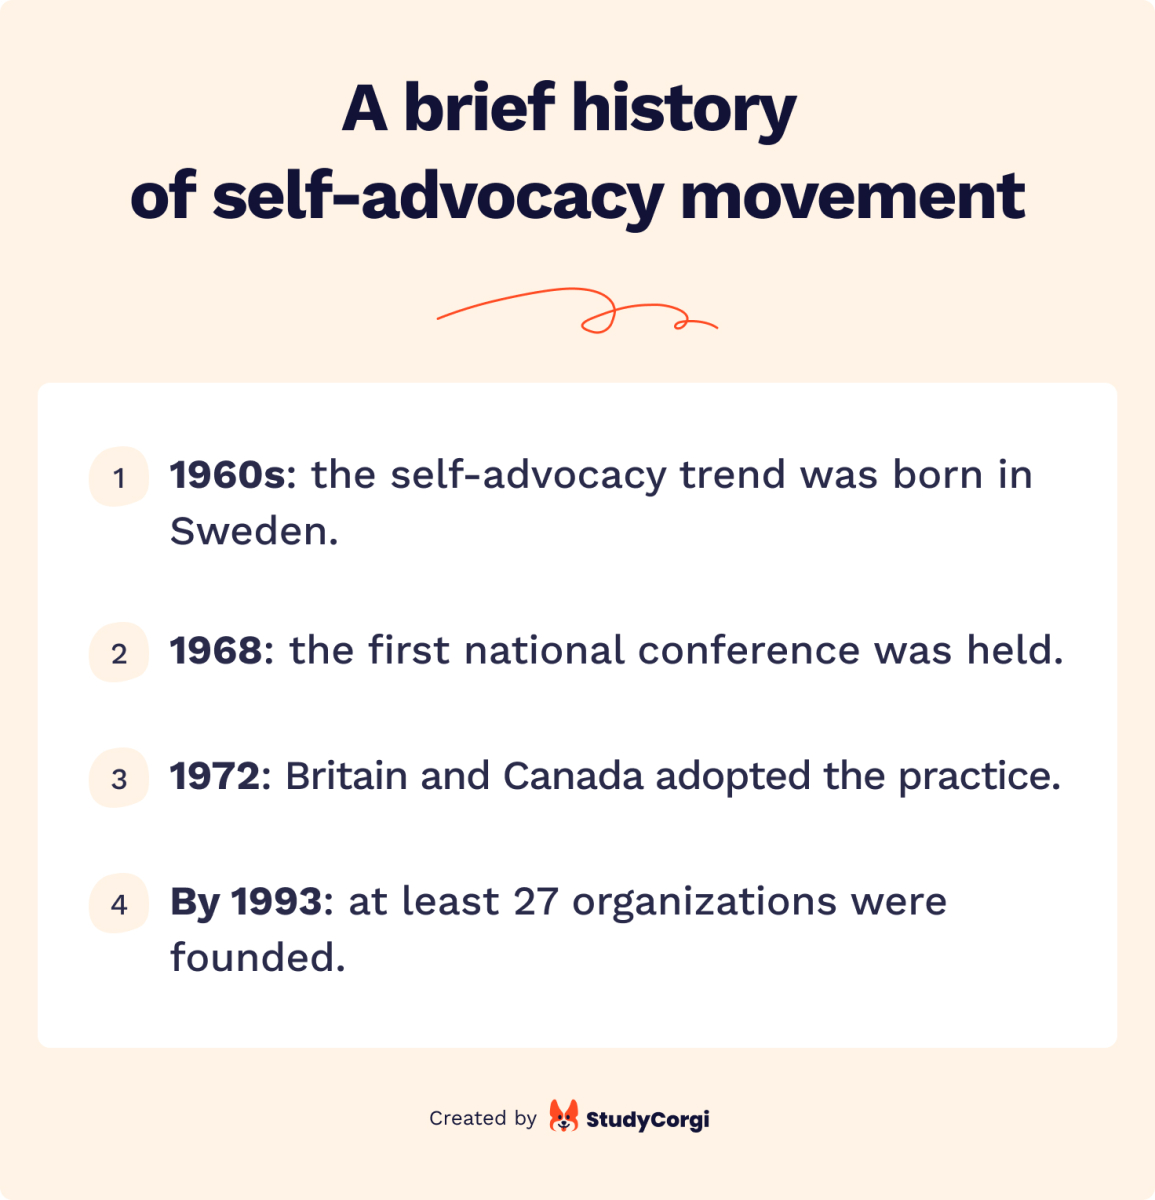 The picture describes a brief history of the self-advocacy movement.